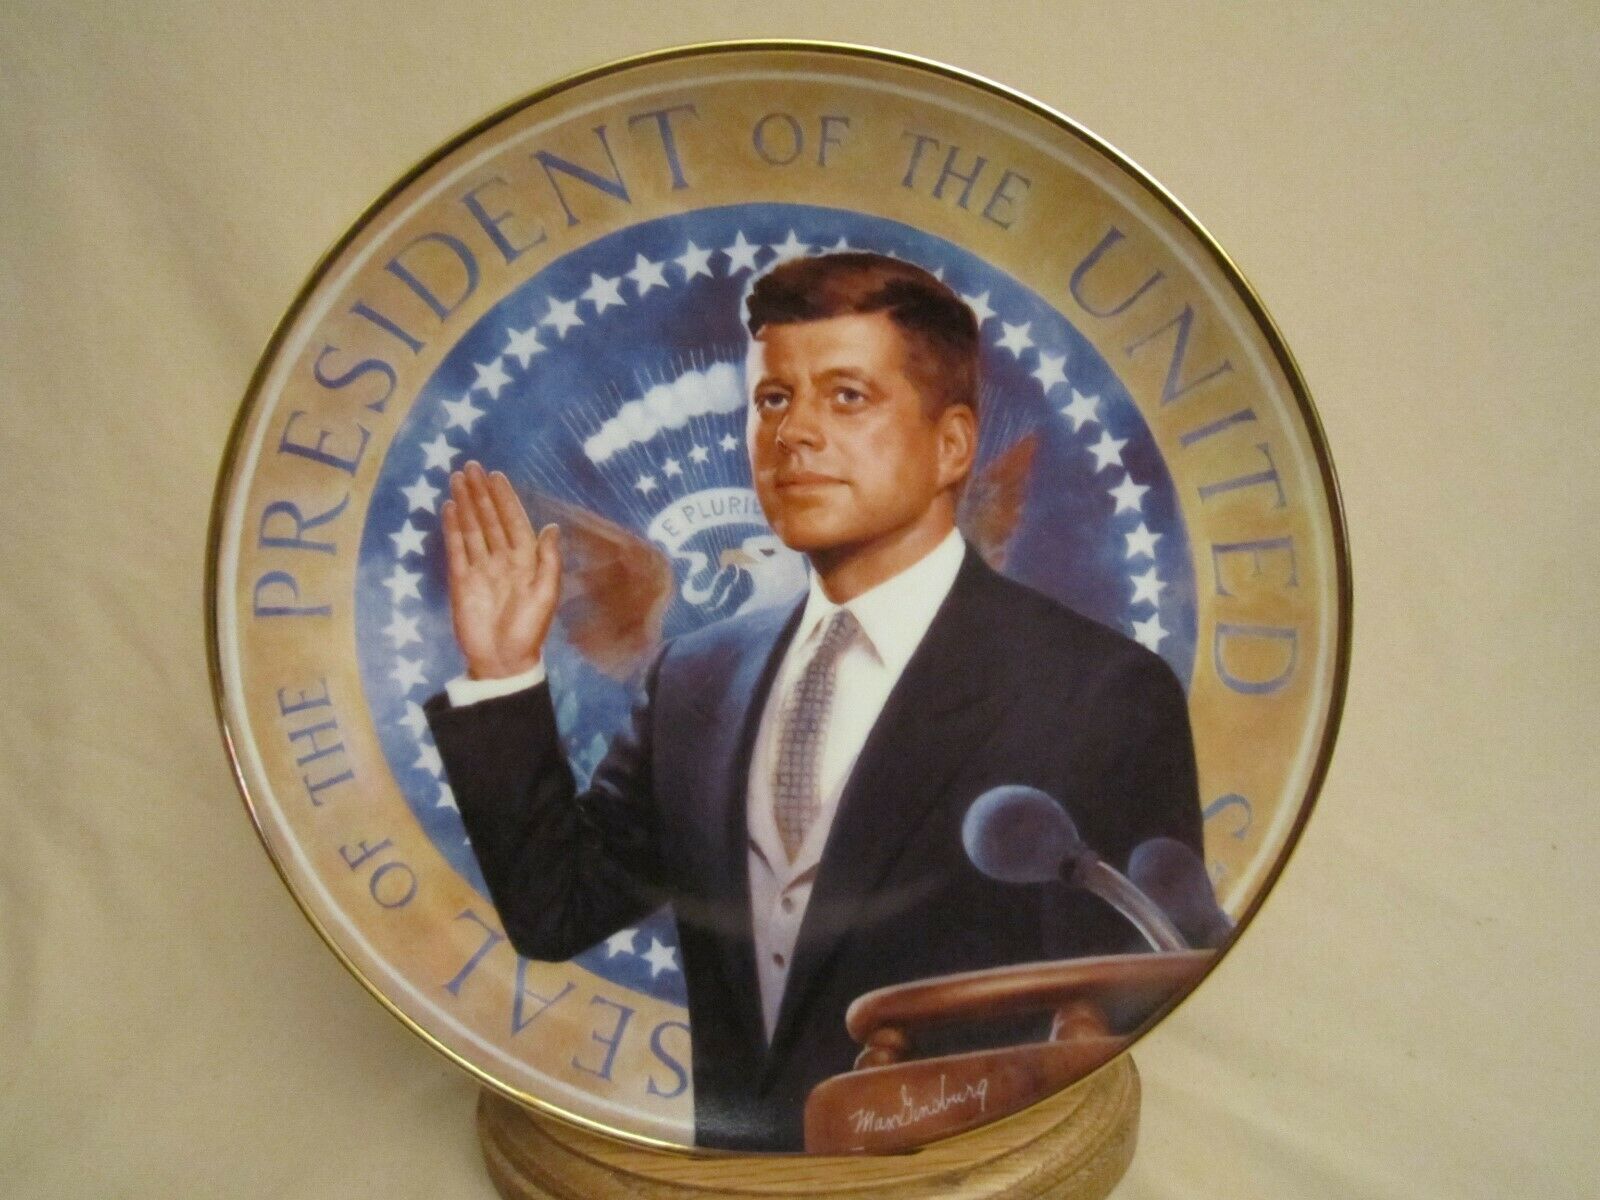 THE TORCH IS PASSED JFK Collector Plate PRESIDENT JOHN F KENNEDY Max Ginsburg - $29.99